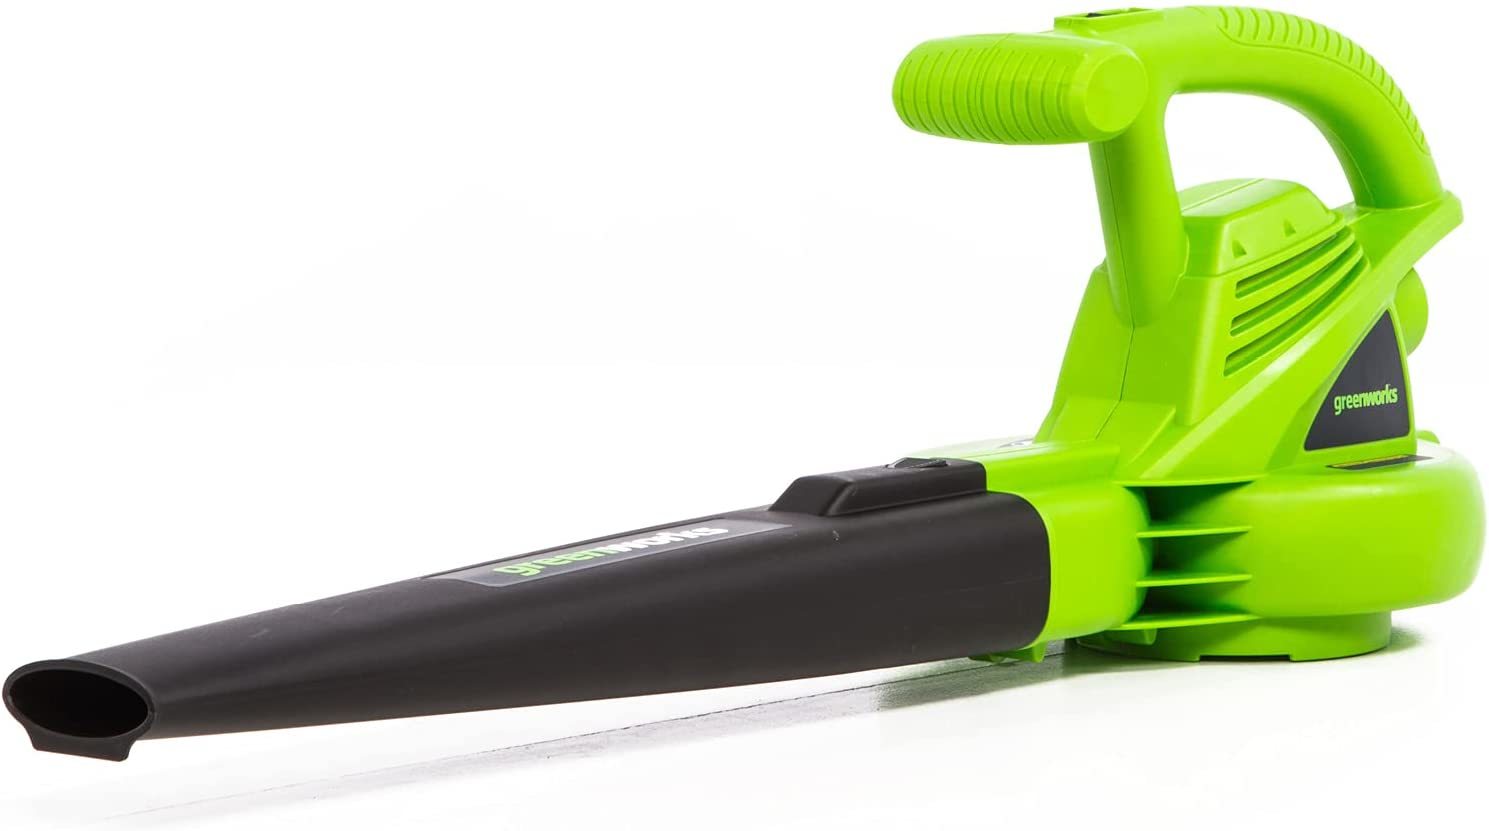 Greenworks 7 Amp 160 MPH/150 CFM Single Speed Electric Blower, 24012 7Amp Corded - $48.99